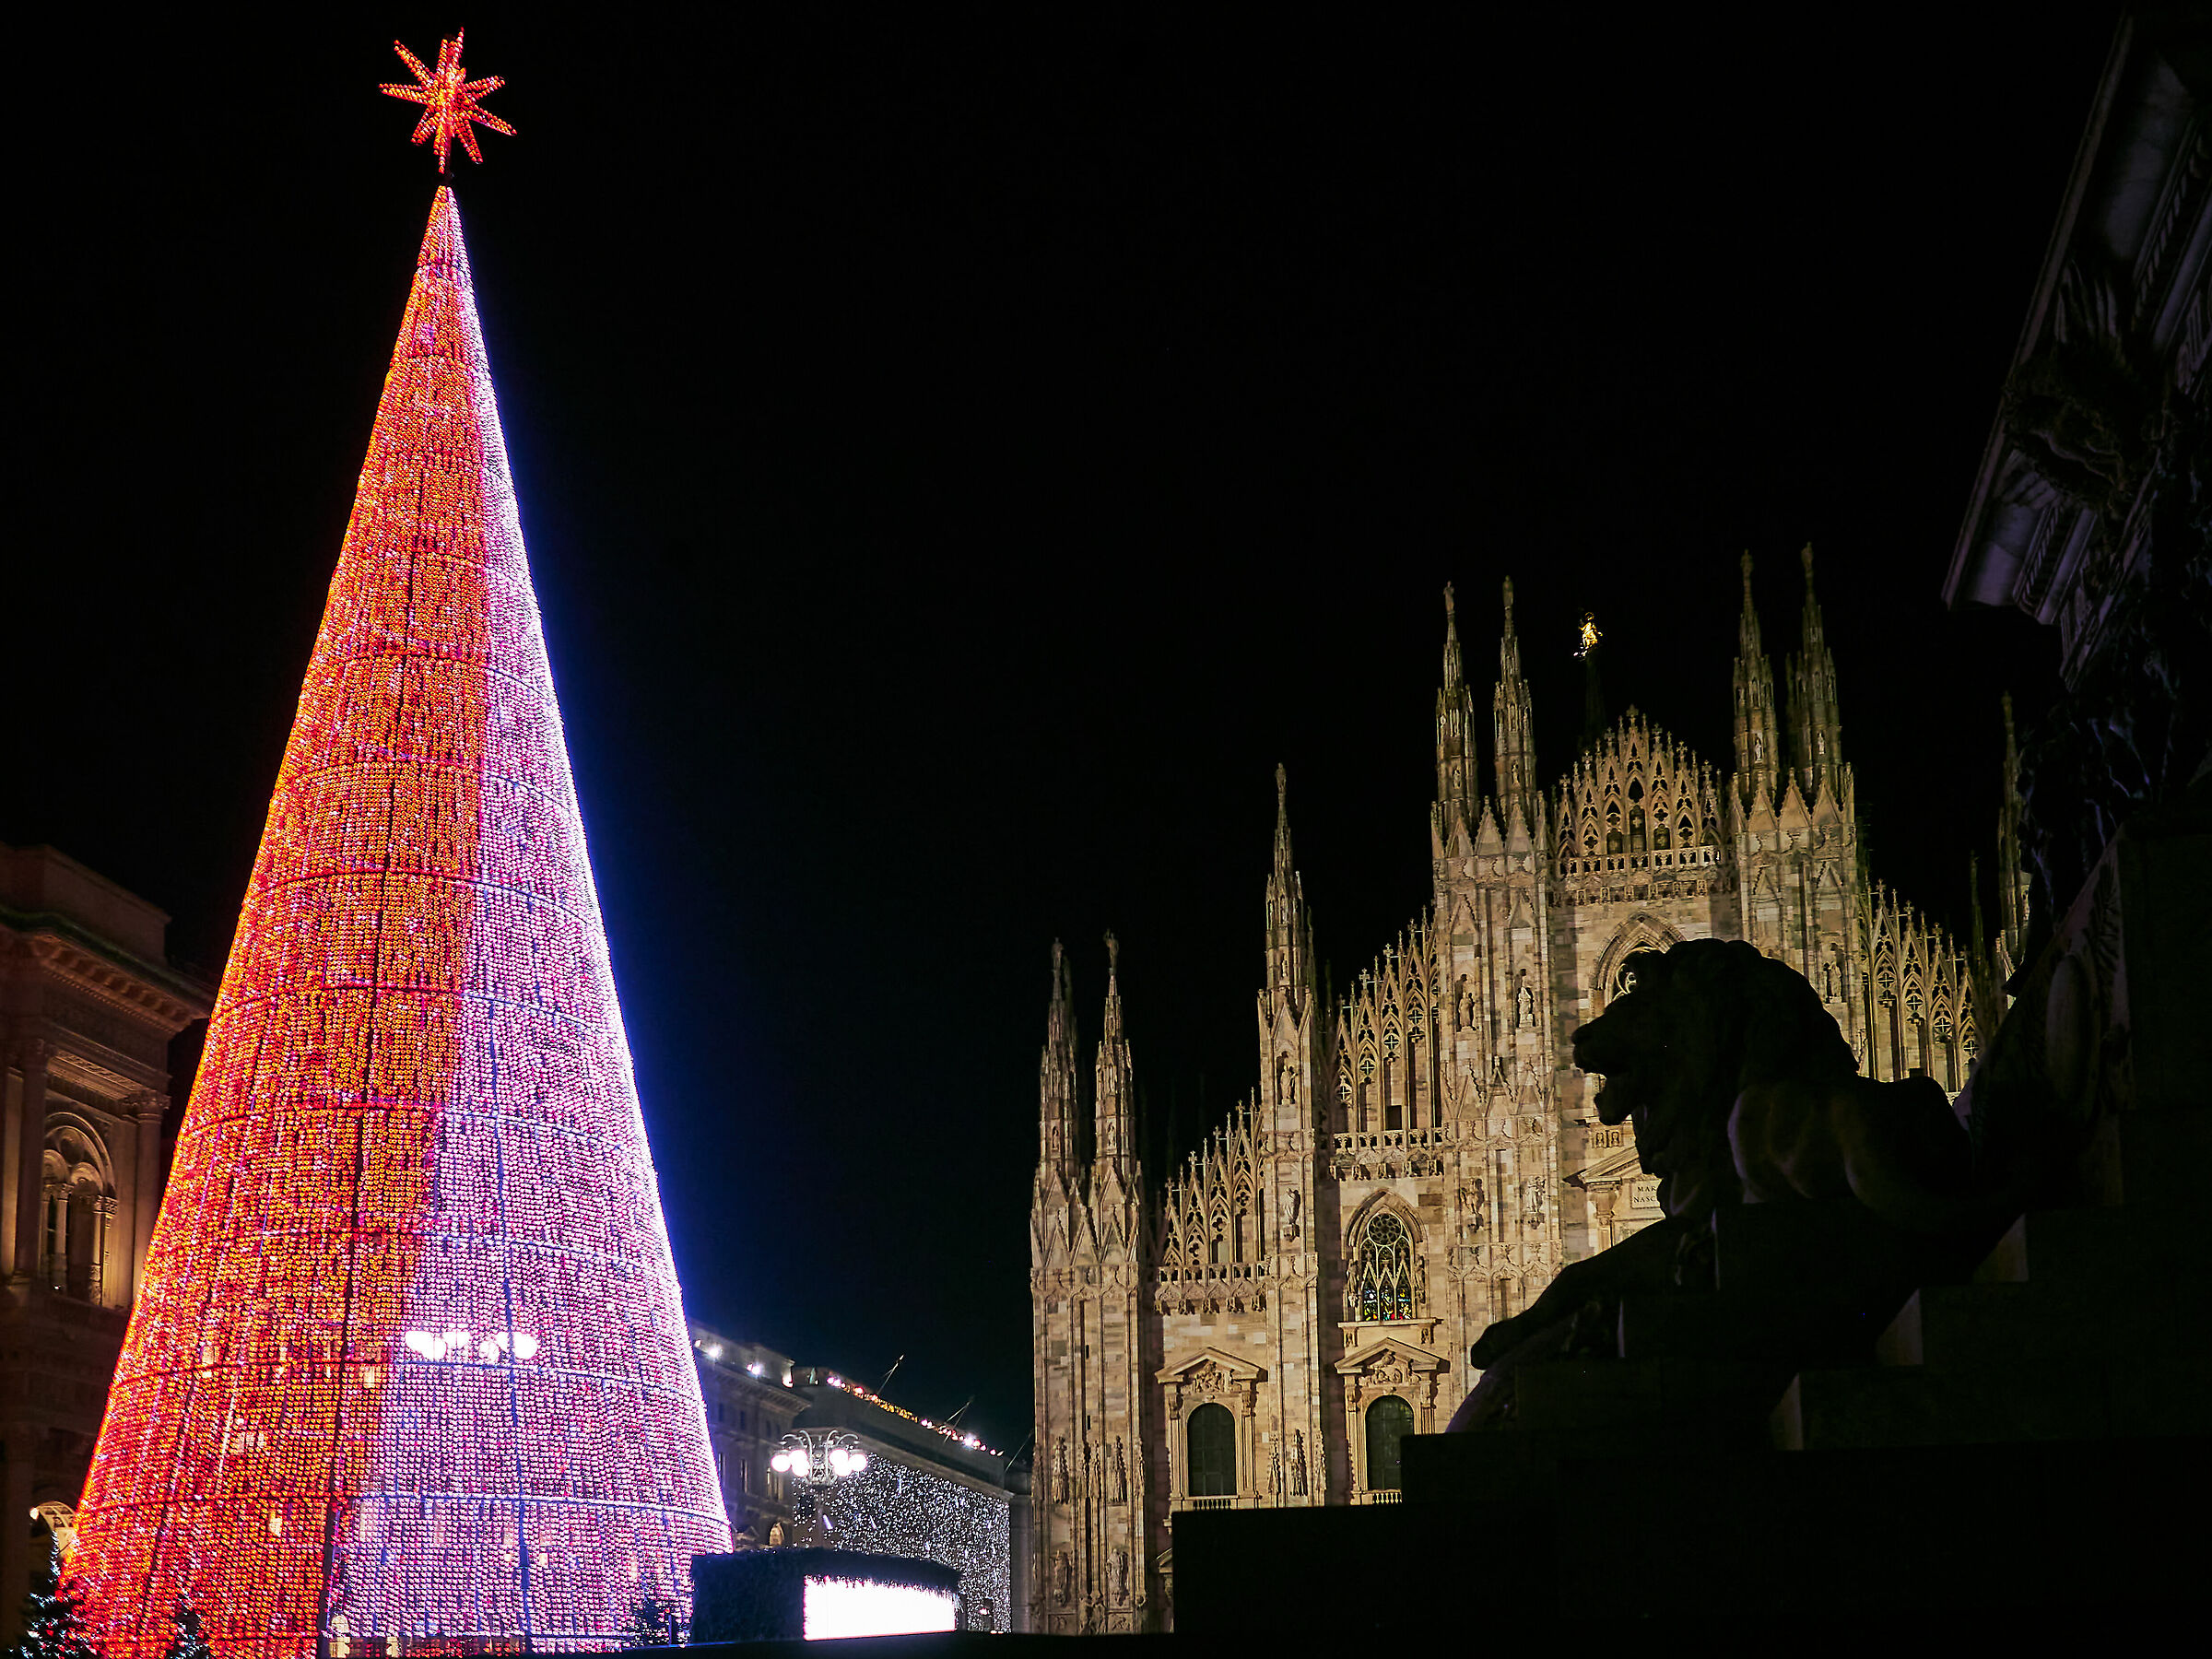 Christmas in Piazza Duomo...